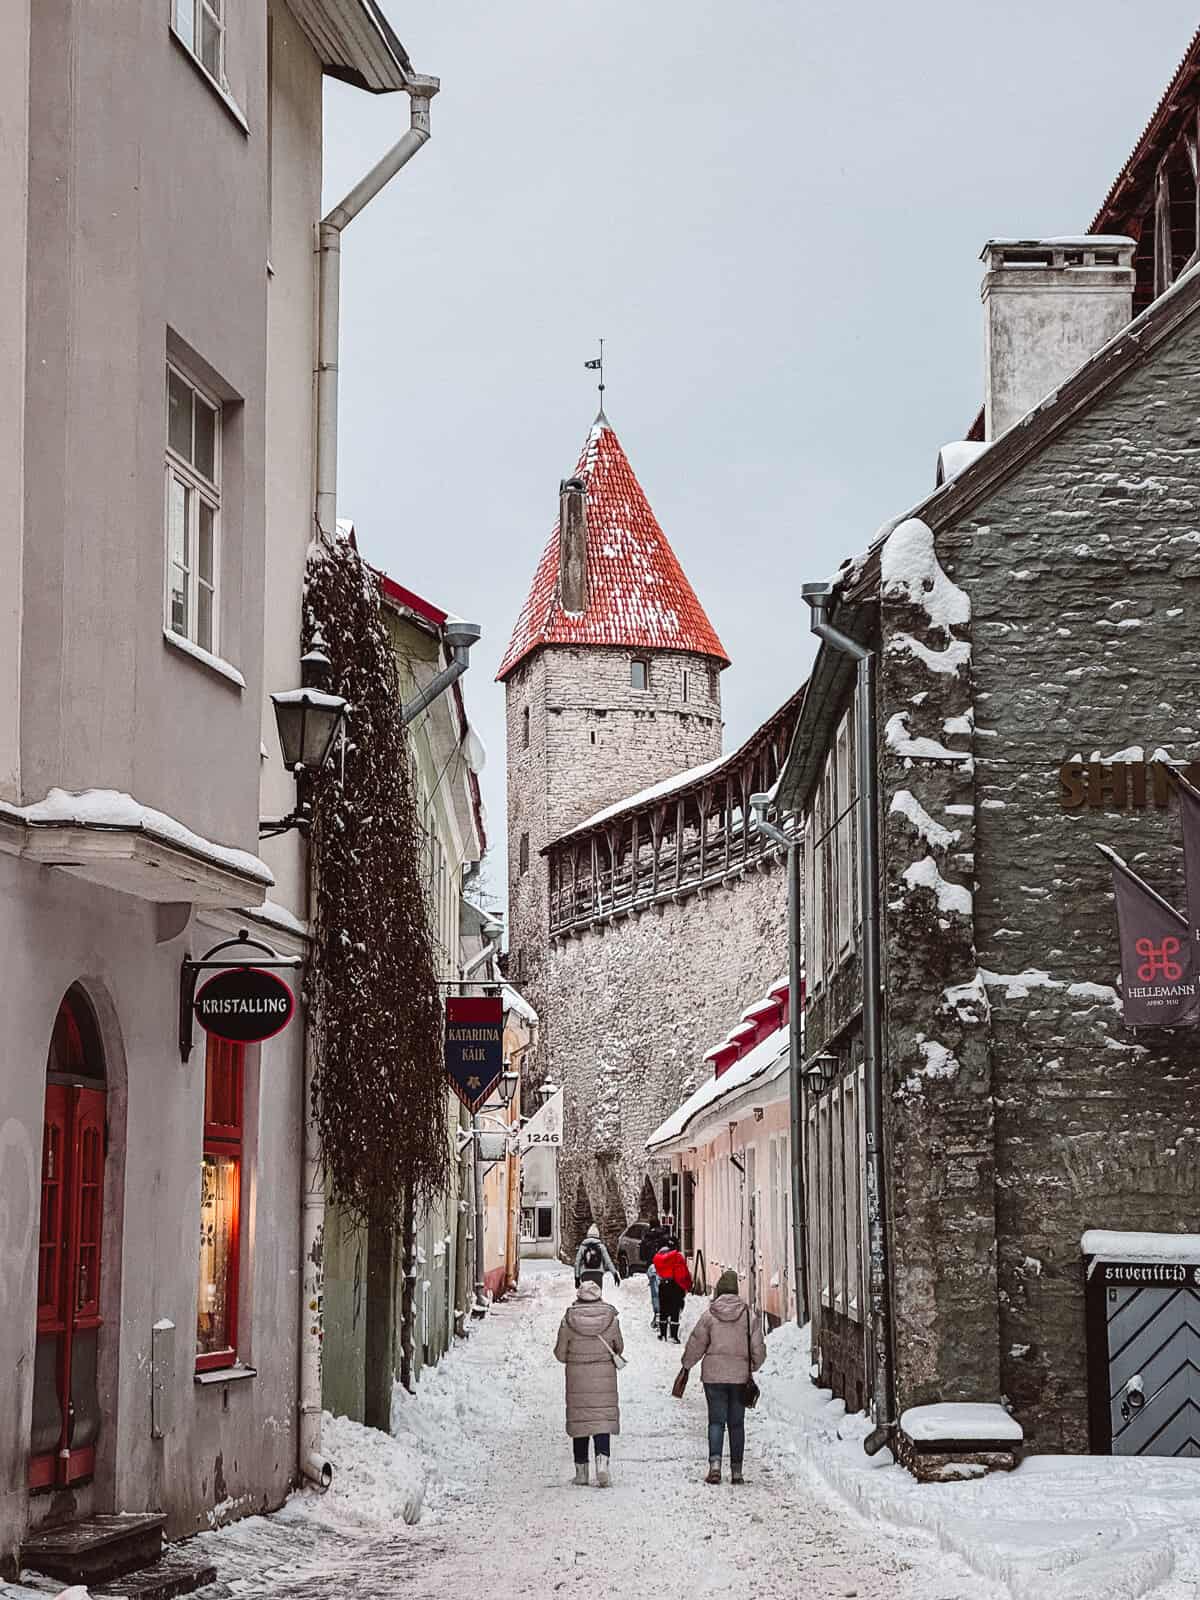 A snowy street in Tallinn's old town, lined with colorful buildings and people walking, evoking the charm of a European winter in Estonia, with the medieval town wall and its defensive tower completing the scene.